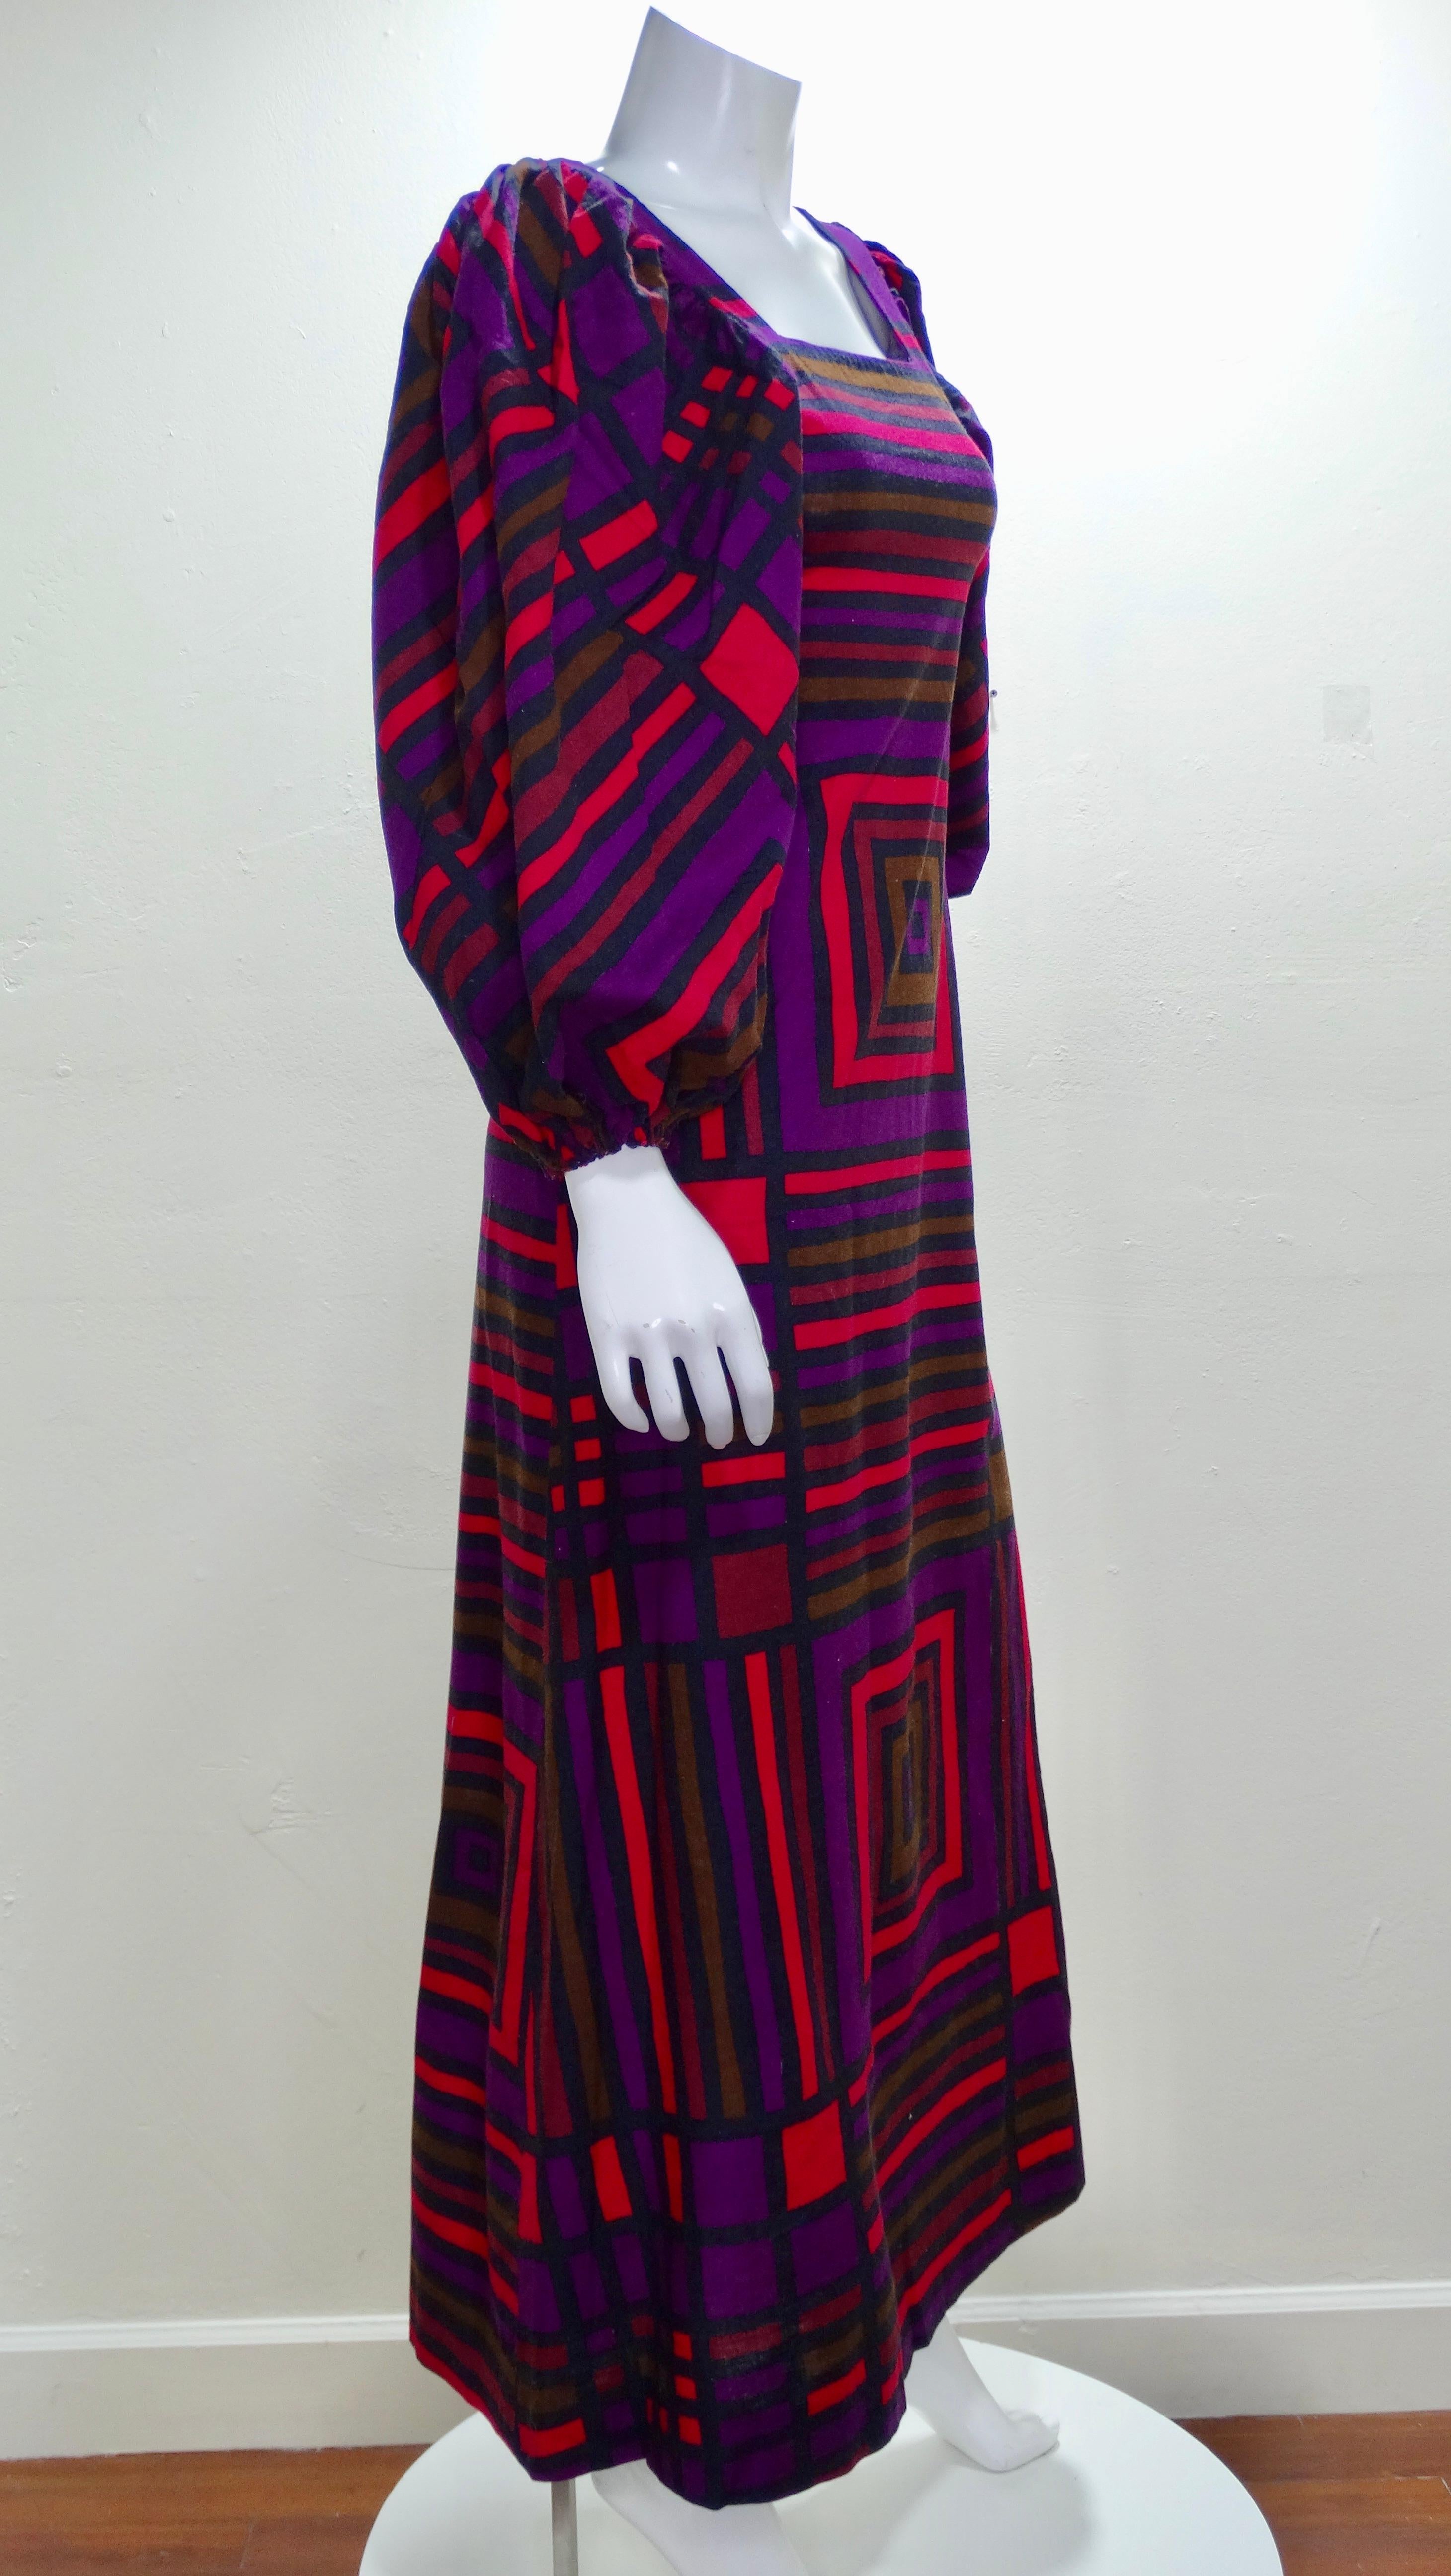 Your perfect dress has arrived and it does not disappoint! This Maskit maxi dress circa 1970's is made of light weight cotton and printed all over with a multi-colored geometric pattern, square neck line and billowy cuffed sleeves. Back zipper